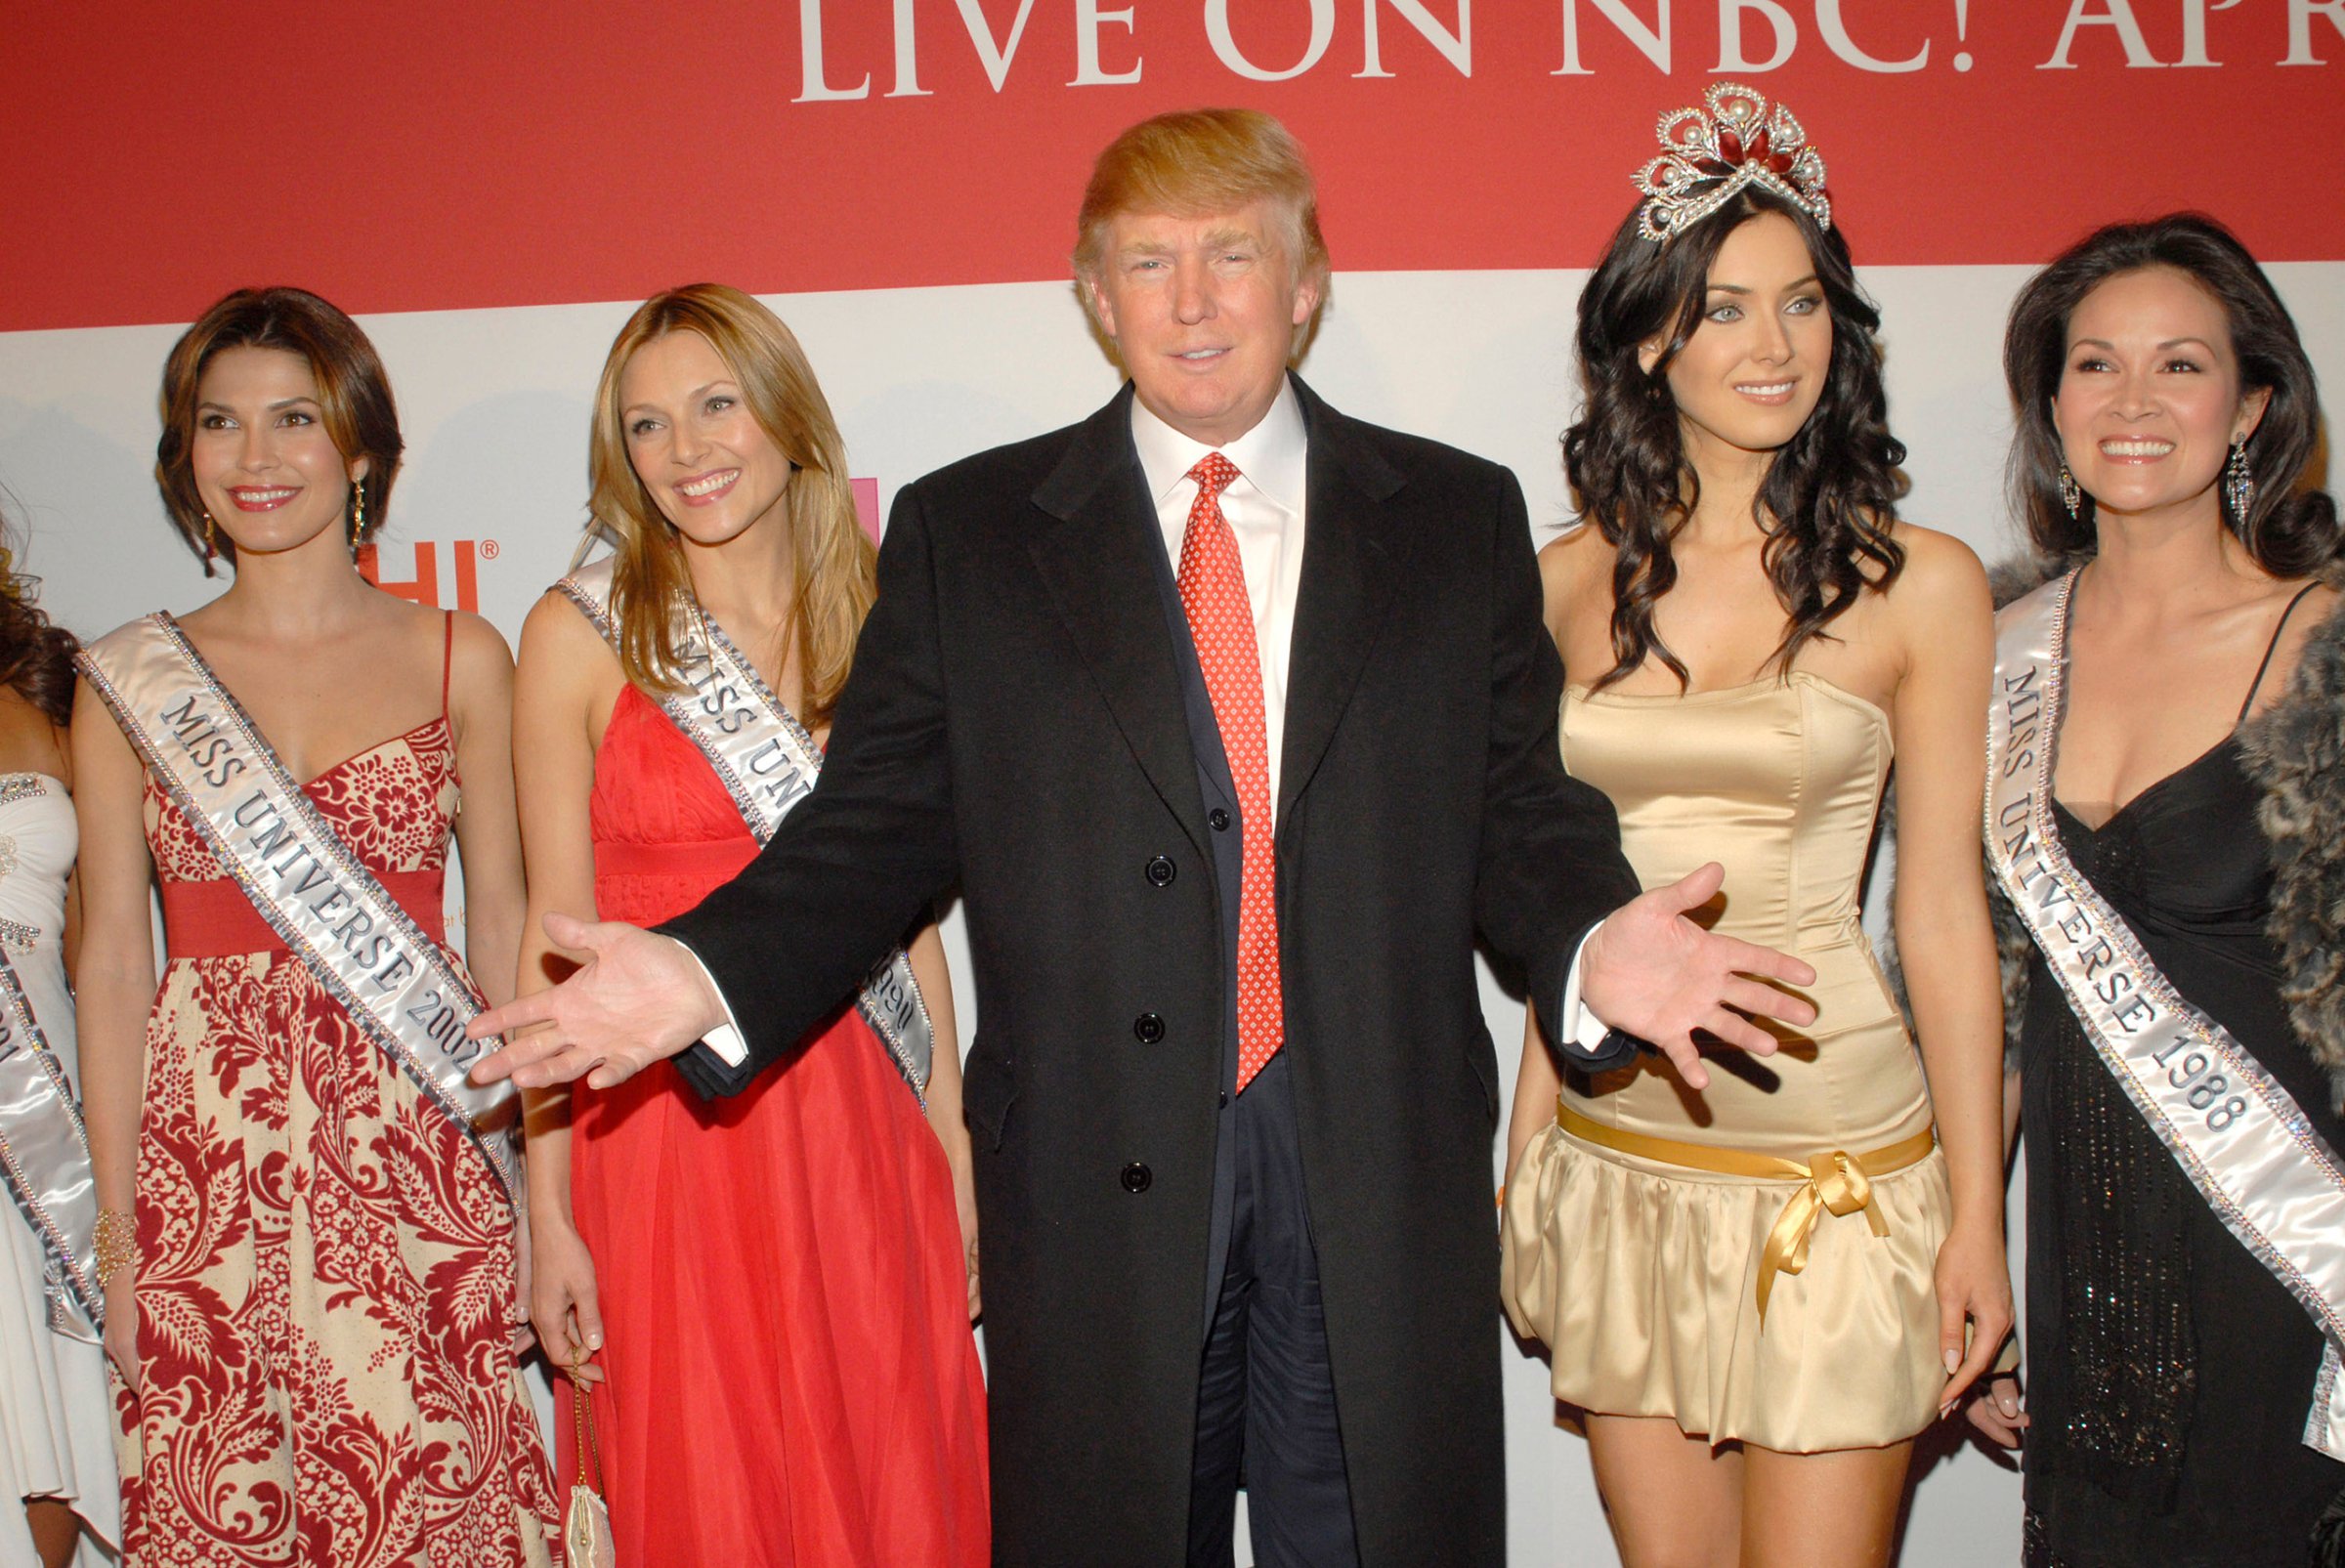 Donald Trump with former Miss Universes and the 2006 current Miss Universe, Natalie Glebova, April 18, 2006.